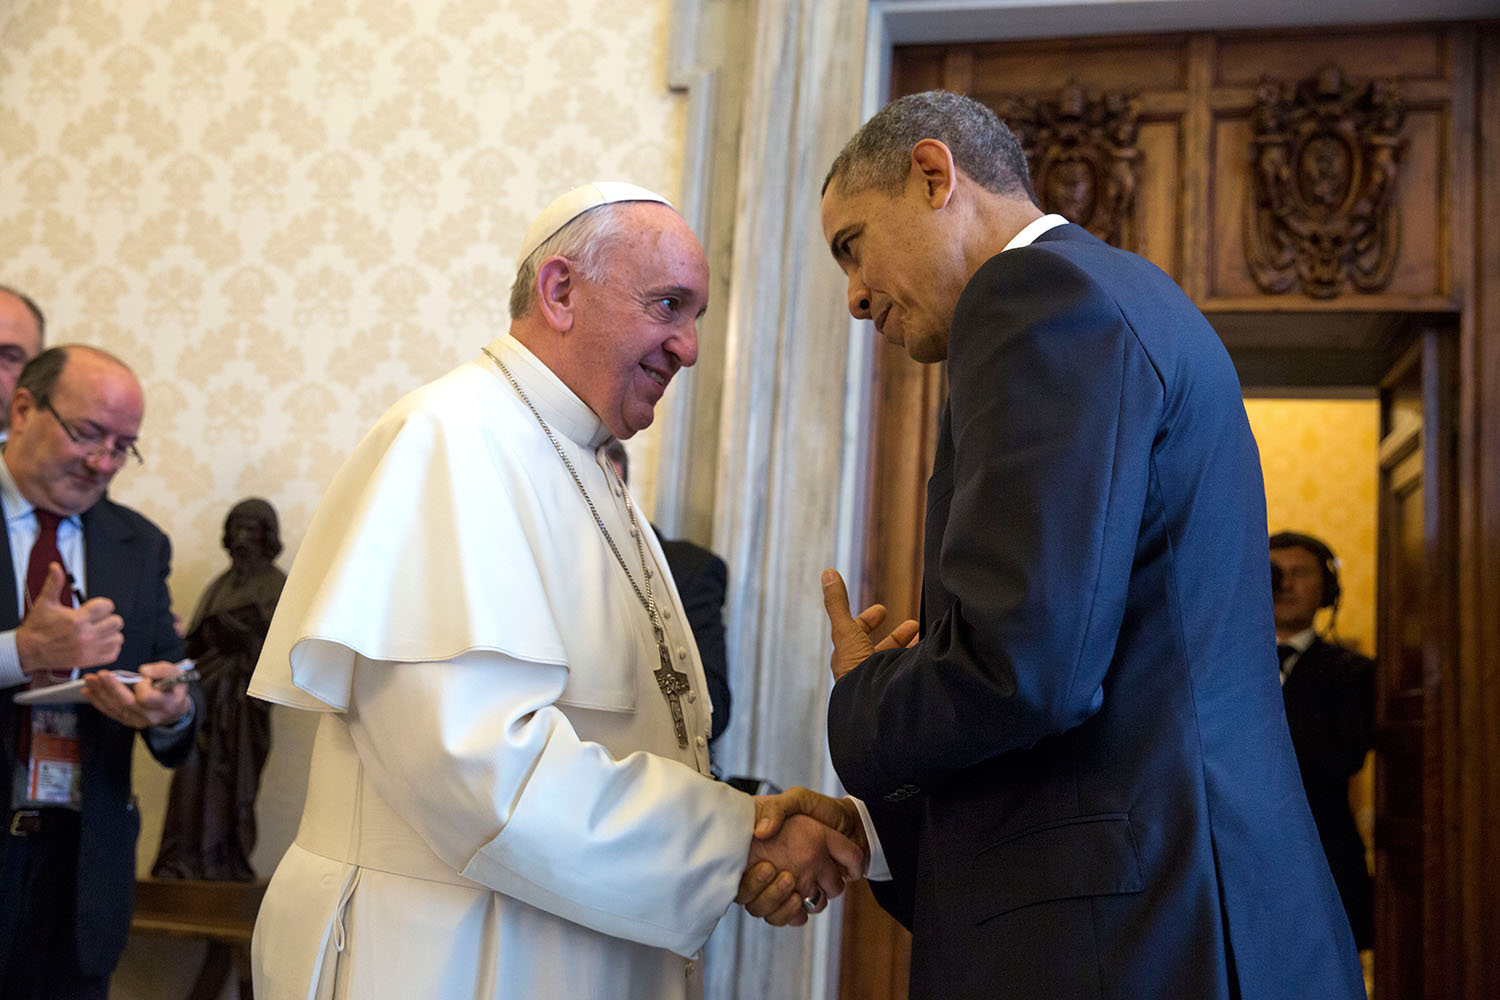 President Barack Obama bids farewell to Pope Francis following a private audience at the Vatican, March 27, 2014. (Official White House Photo by Pete Souza)